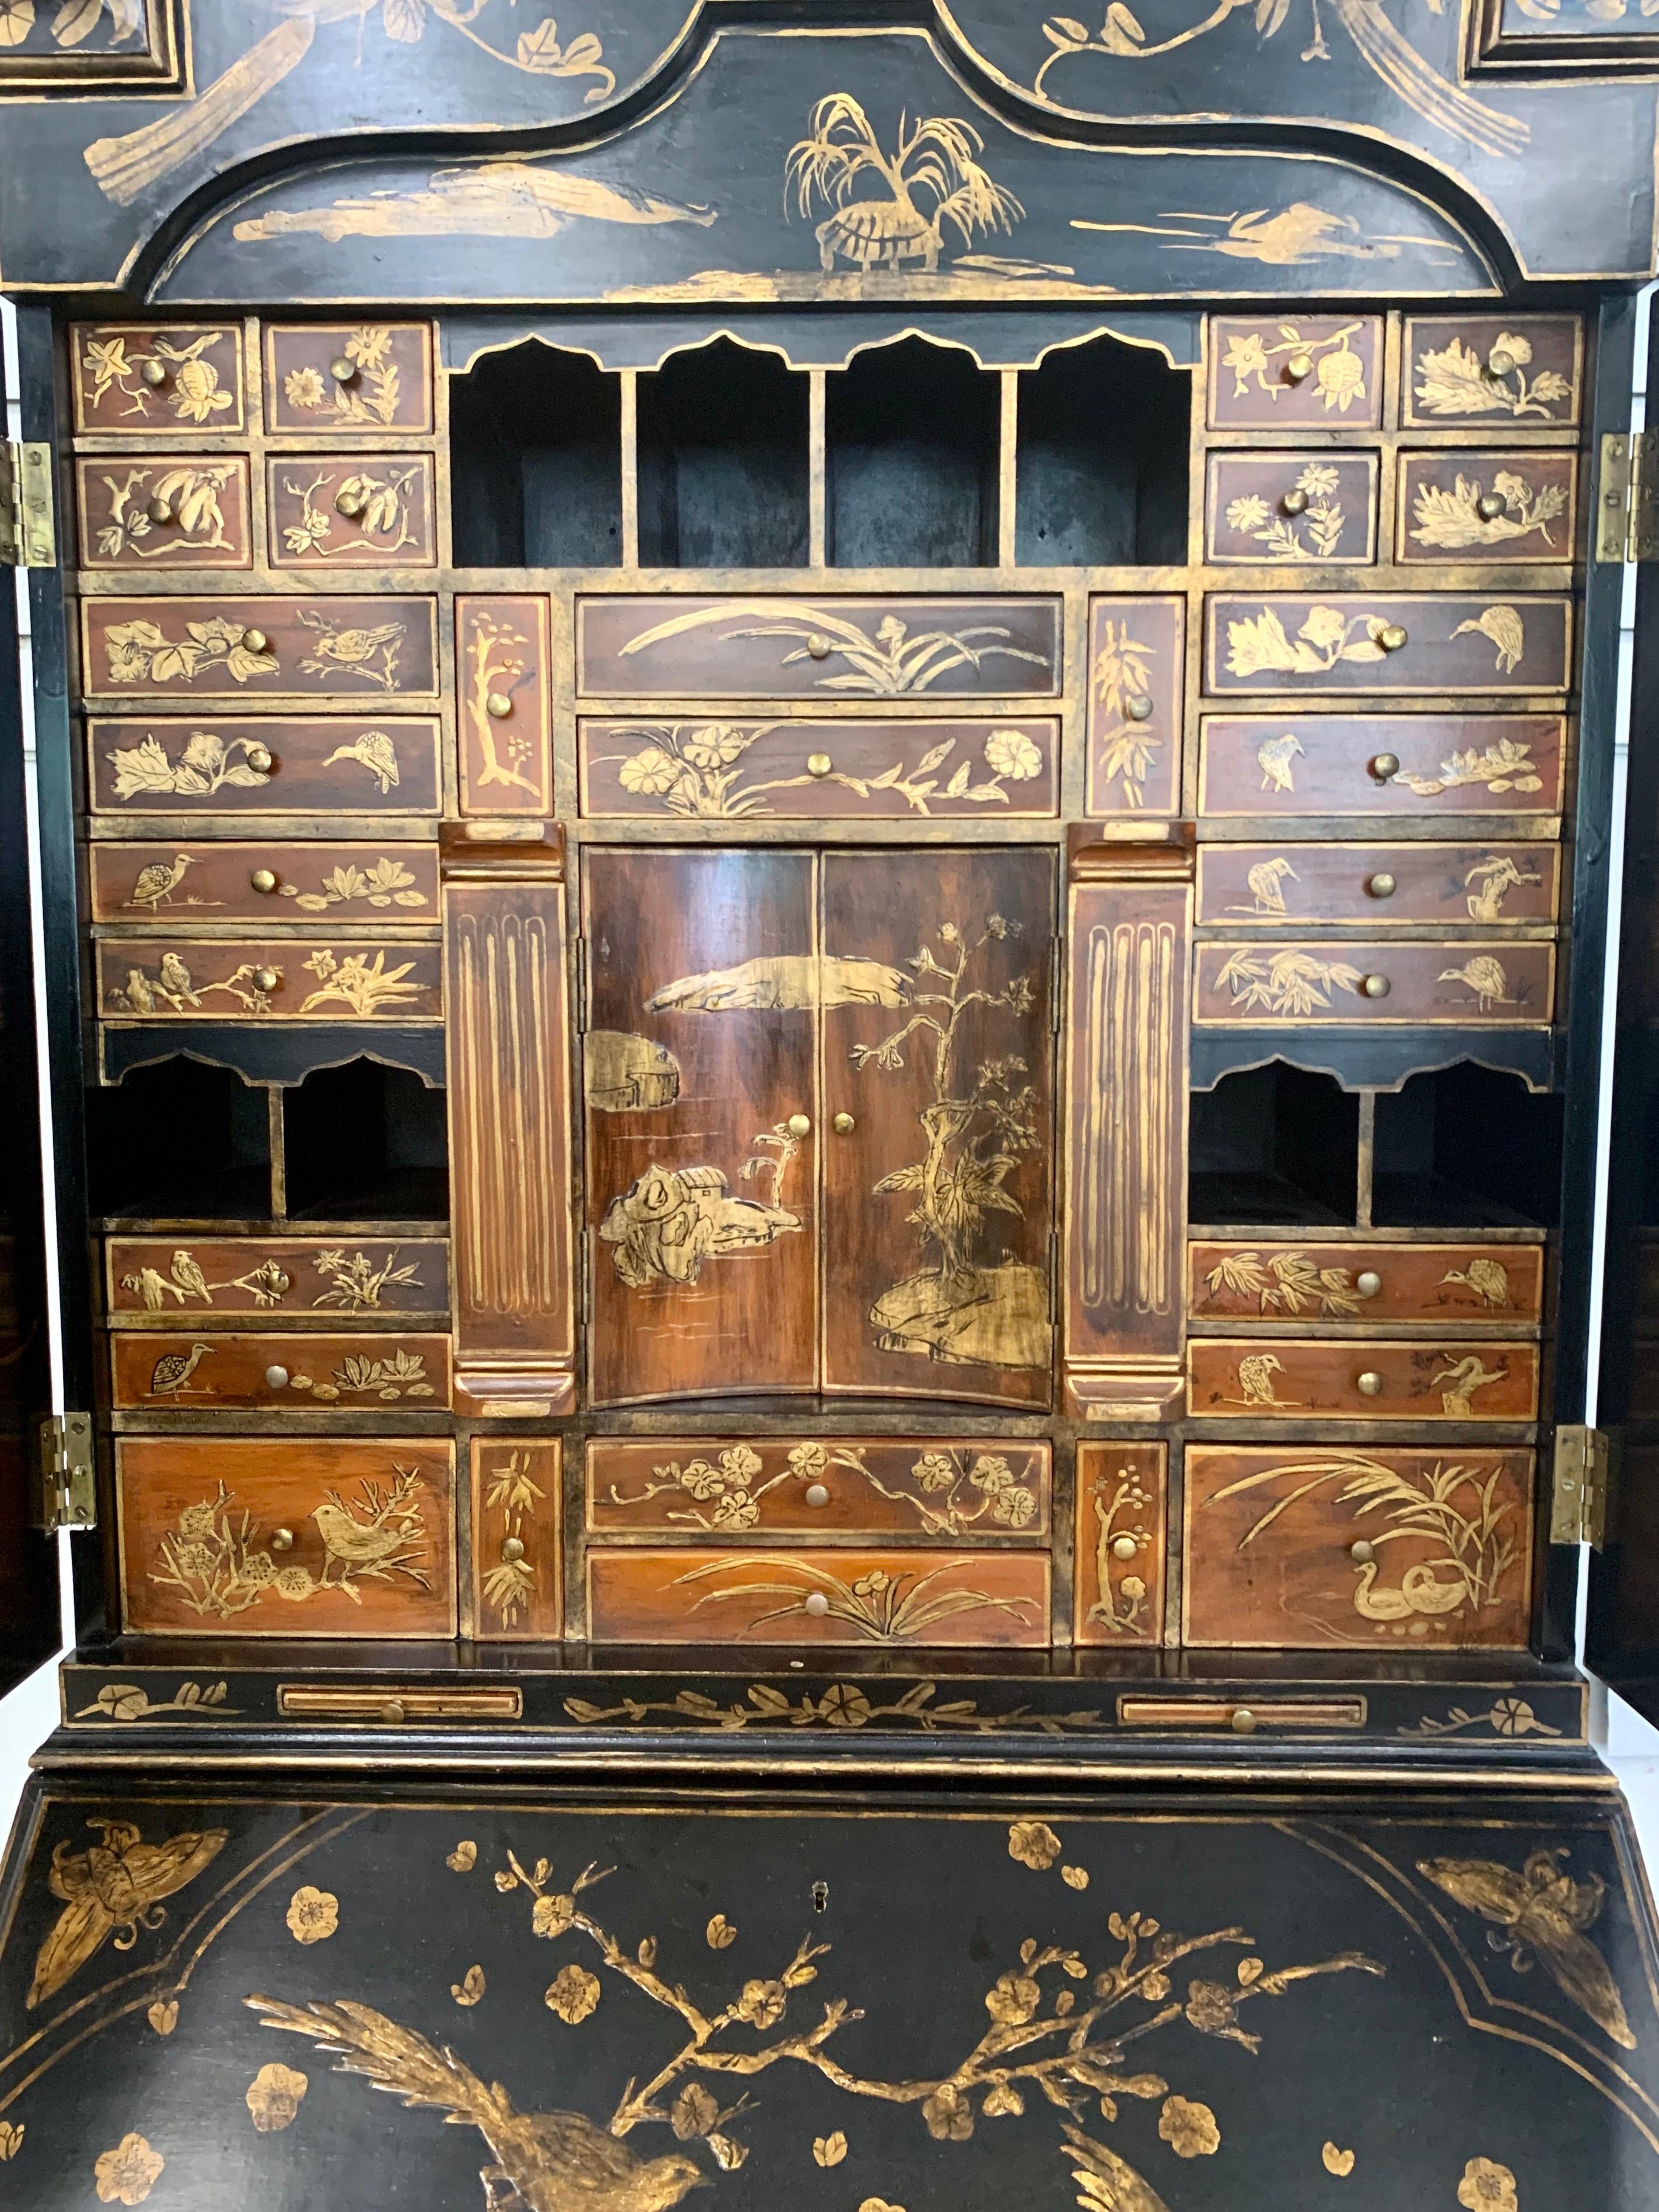 Stunning, one of a kind, vintage Asian black and gold lacquer chinoiserie secretary desk. What makes this secretaire so unusual is the raised birds and floral designs throughout and the incredible craftsmanship. There are multiple drawers and